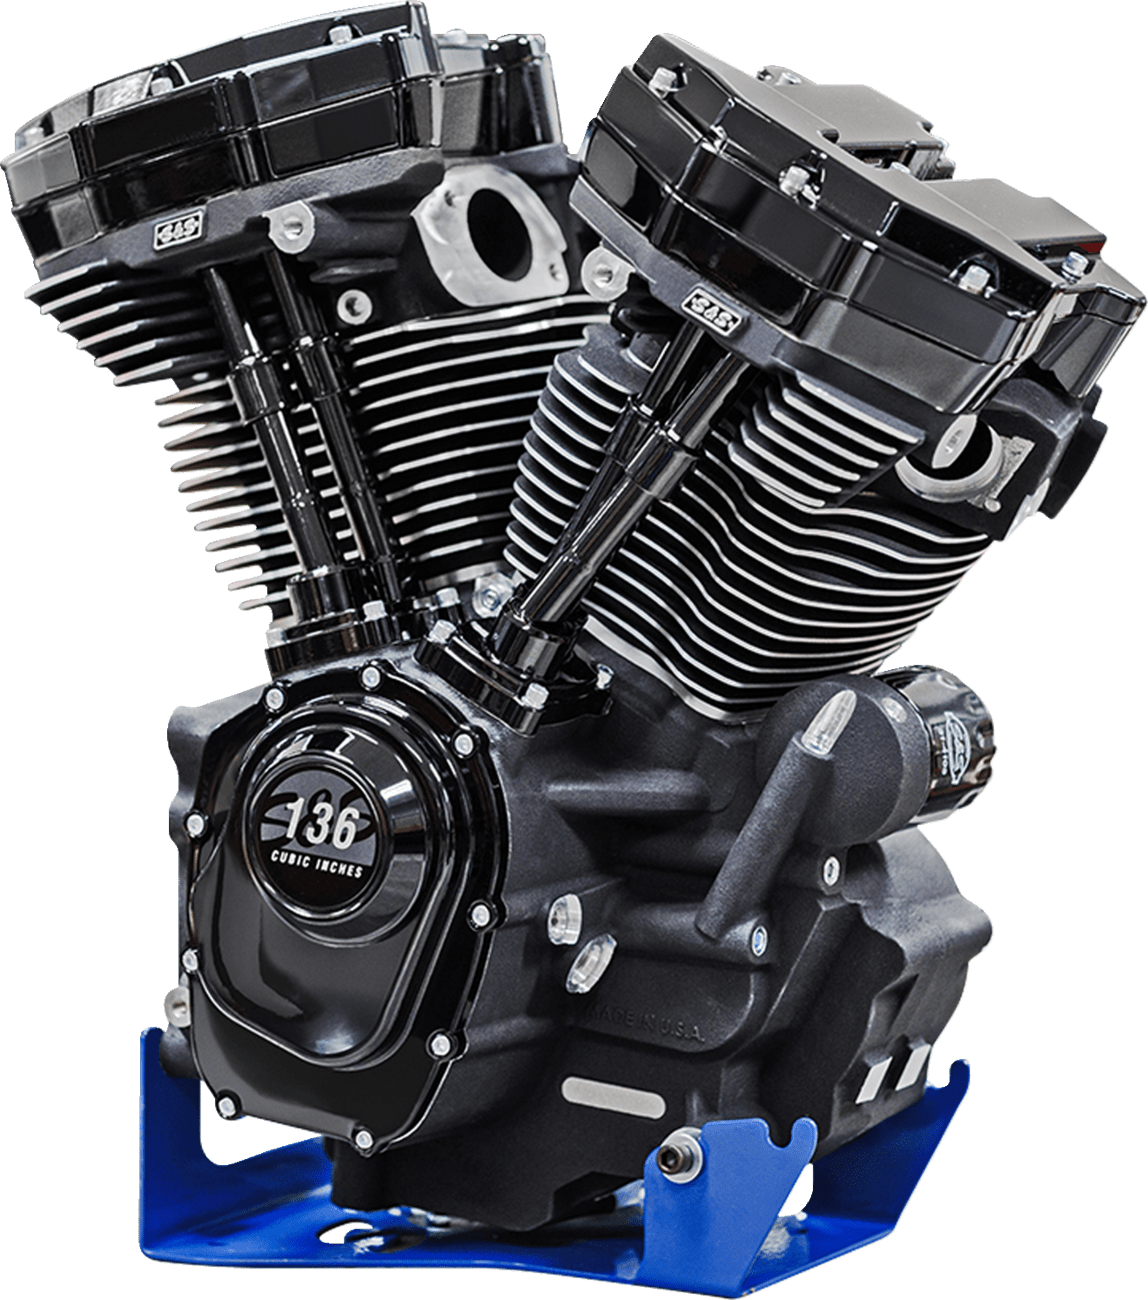 S&S CYCLES-MK136 Black Edition M8 Engine / M8 Bagger-Engine-MetalCore Harley Supply